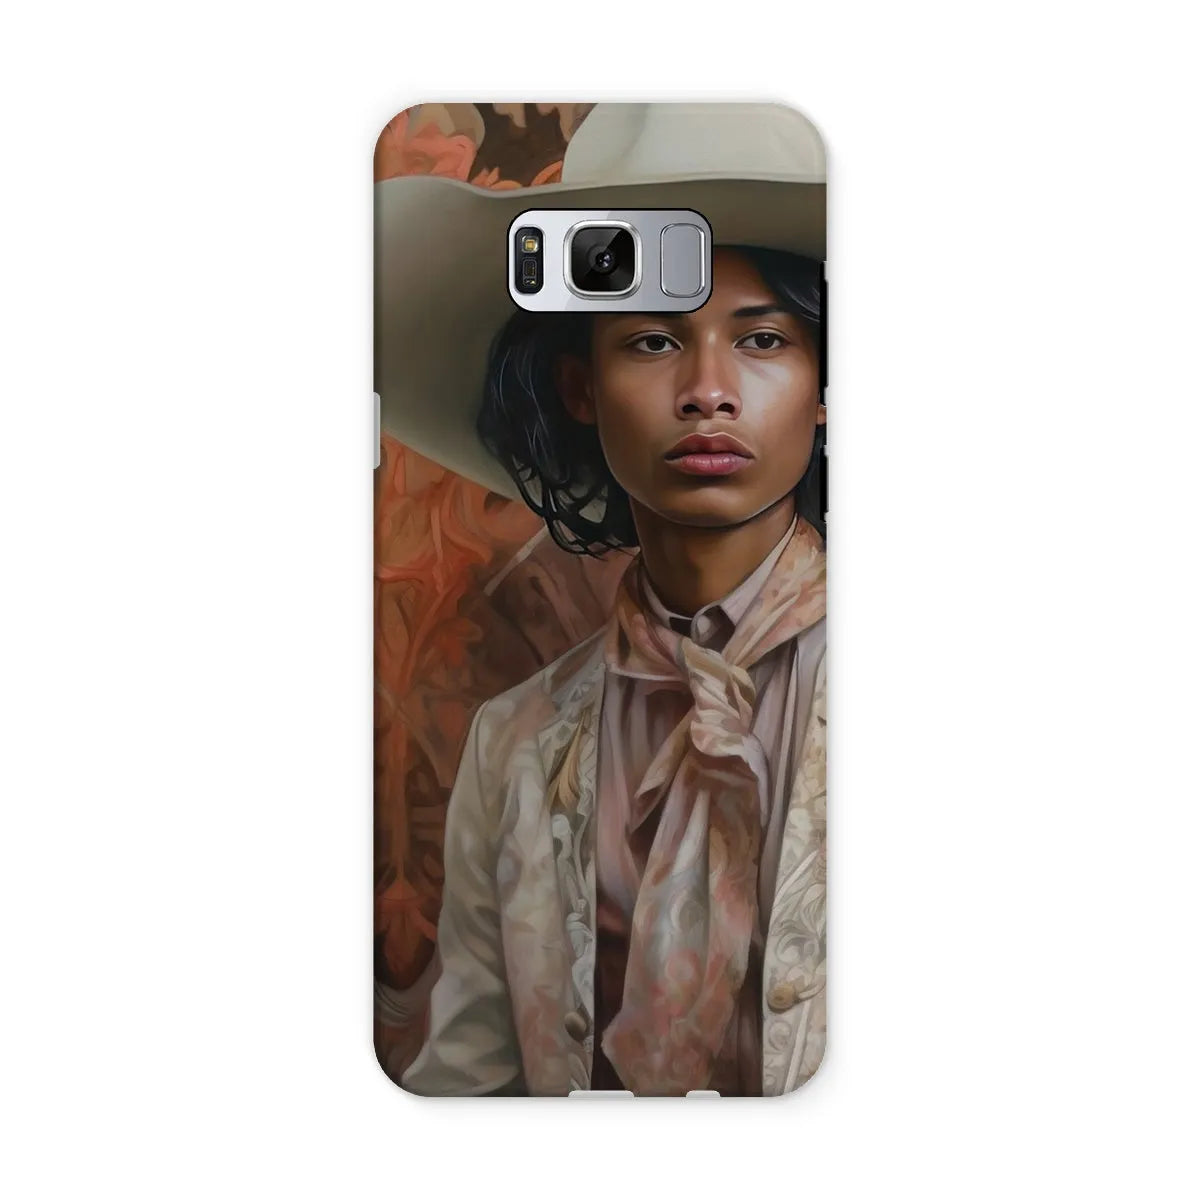 Arjuna - Gay South Asian Cowboy Art Phone Case - Samsung Galaxy S8 / Matte - Mobile Phone Cases - Aesthetic Art